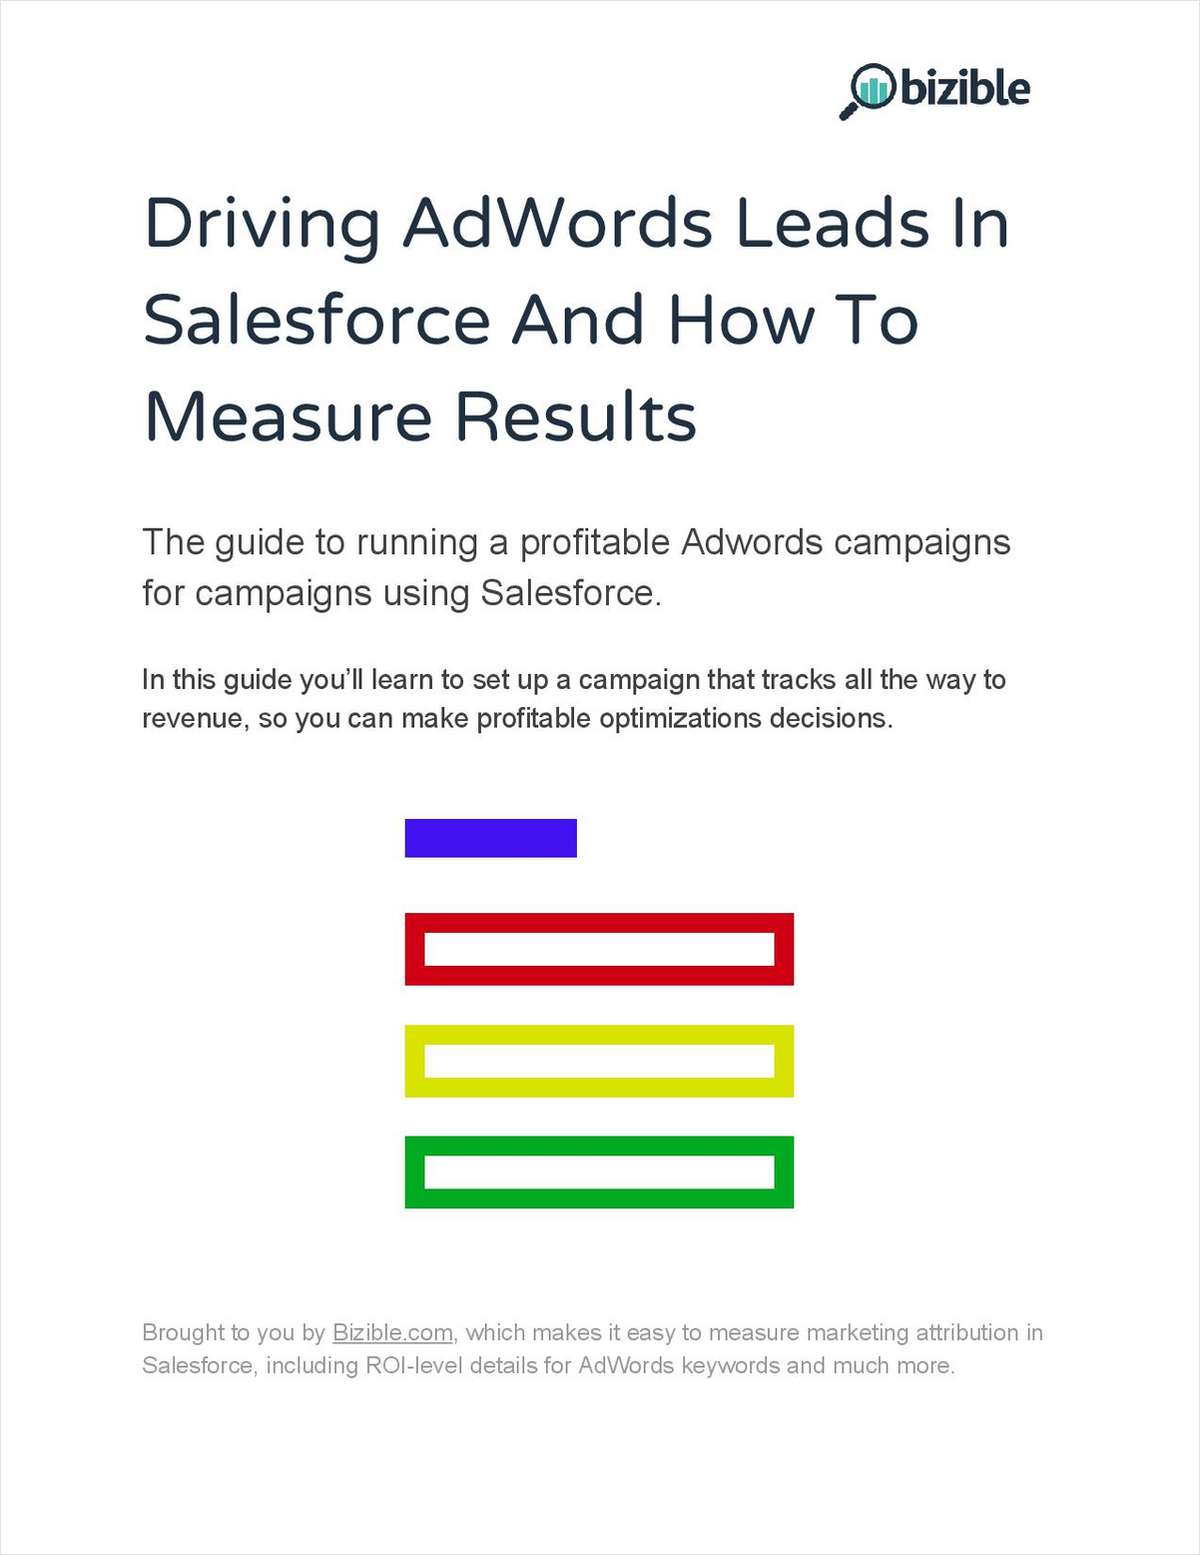 Driving AdWords Leads In Salesforce and How to Measure Results